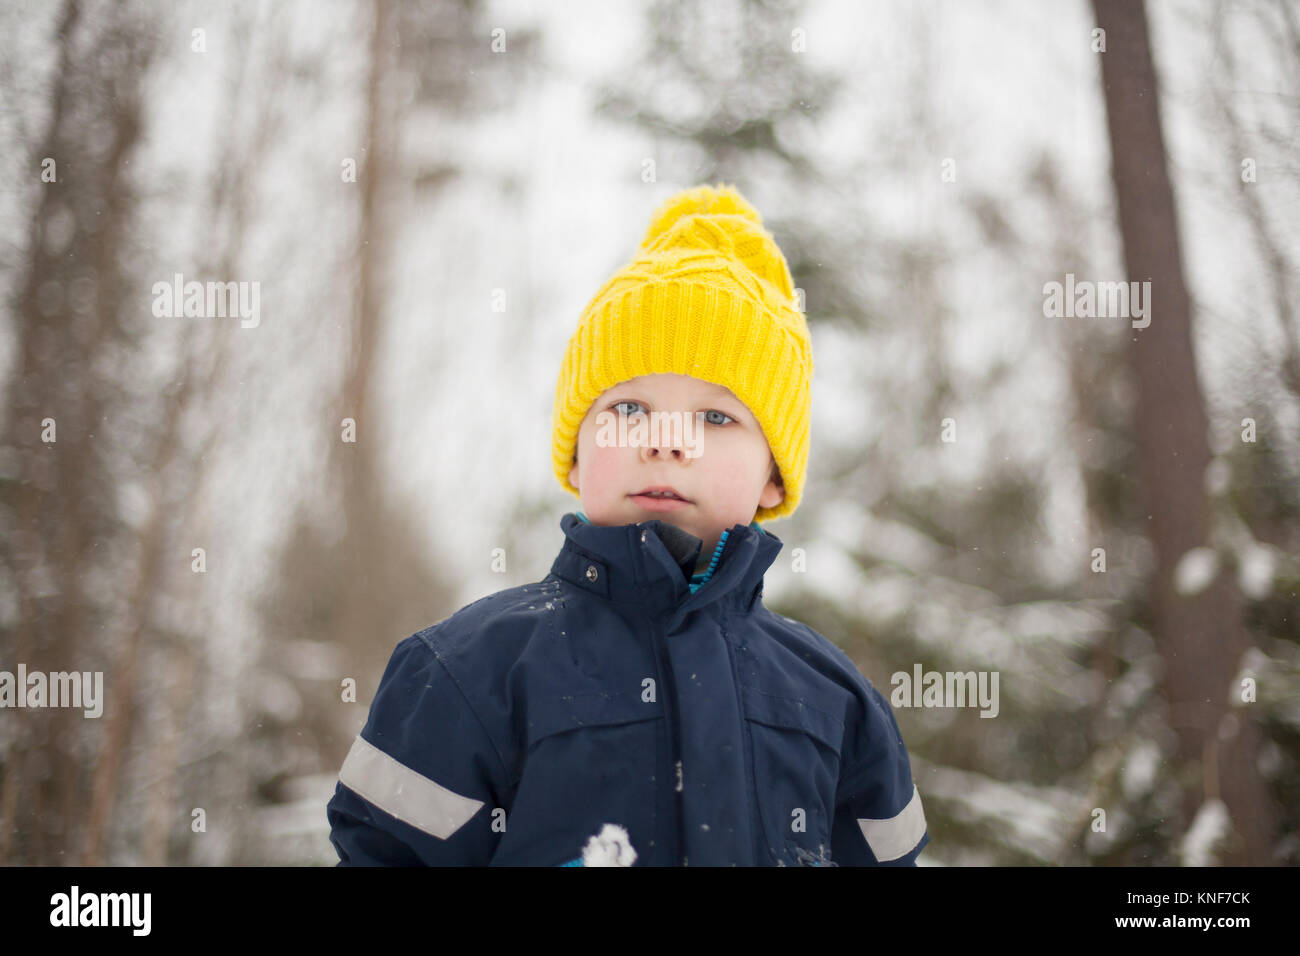 Boy in yellow knit hat in snow covered forest Stock Photo